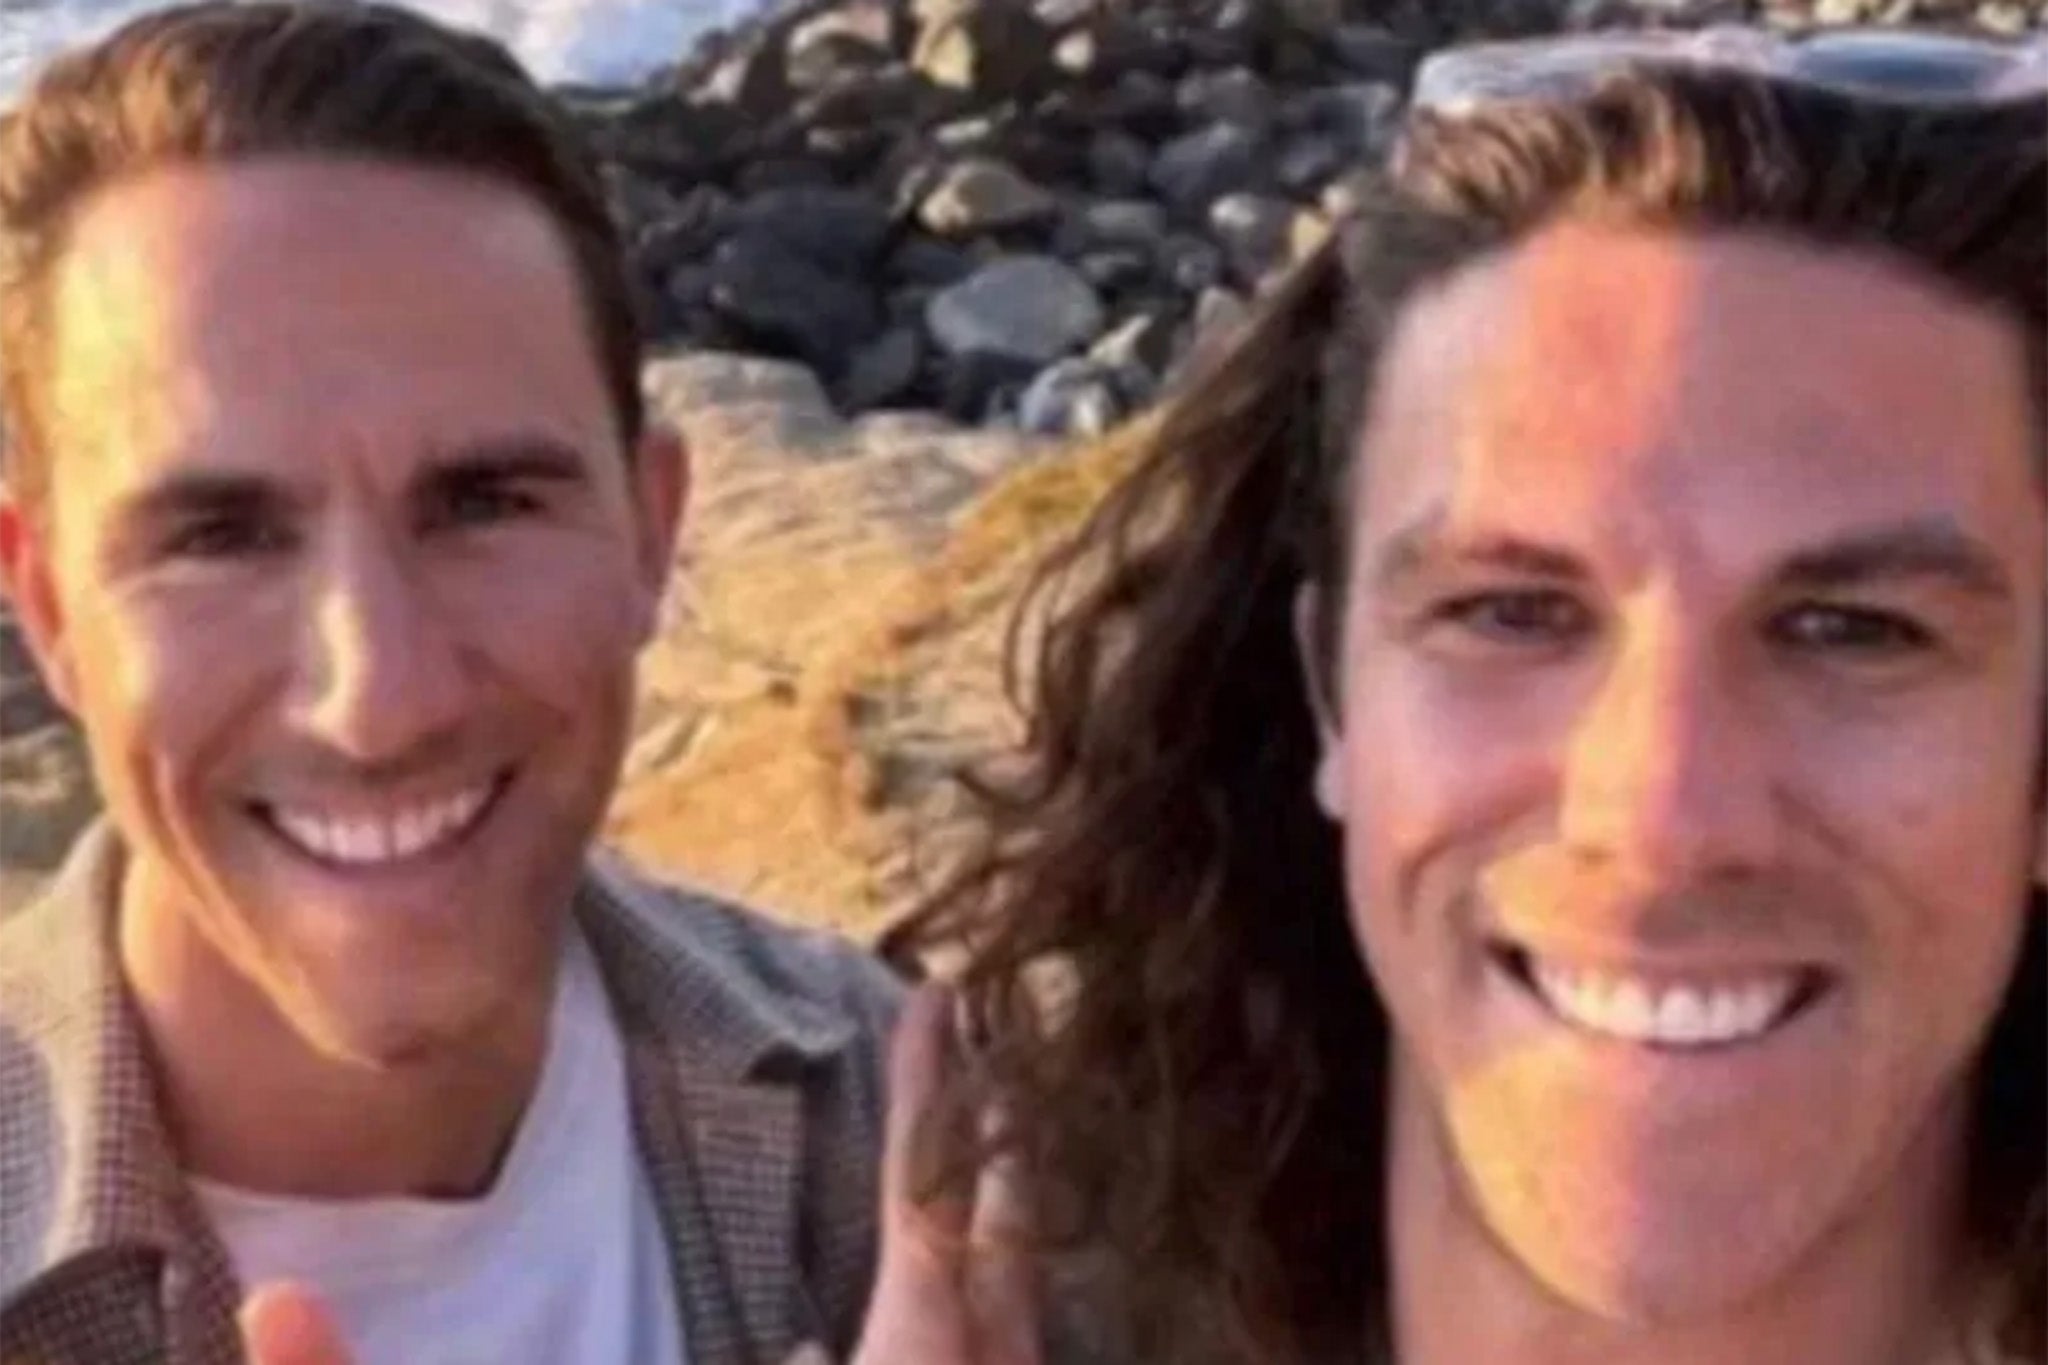 Australian brothers Jake and Callum Robinson disappeared in Baja California, Mexico and their American friend Carter Rhoad have been missing since 27 April, 2024